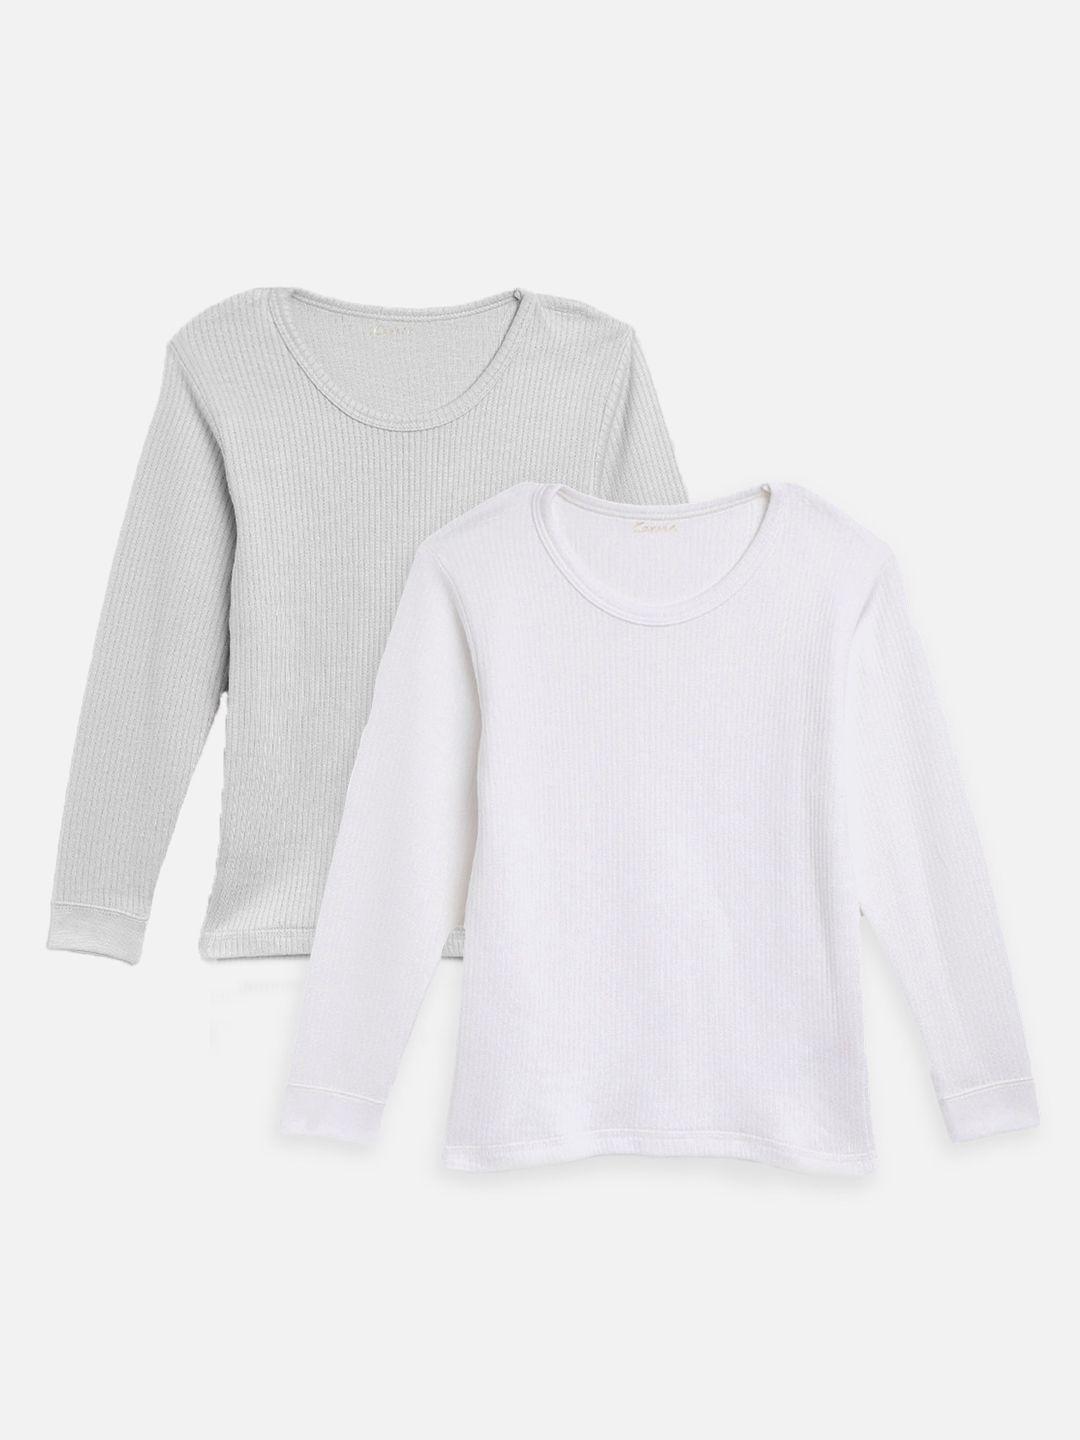 kanvin boys pack of 2 grey & white ribbed cotton thermal tops